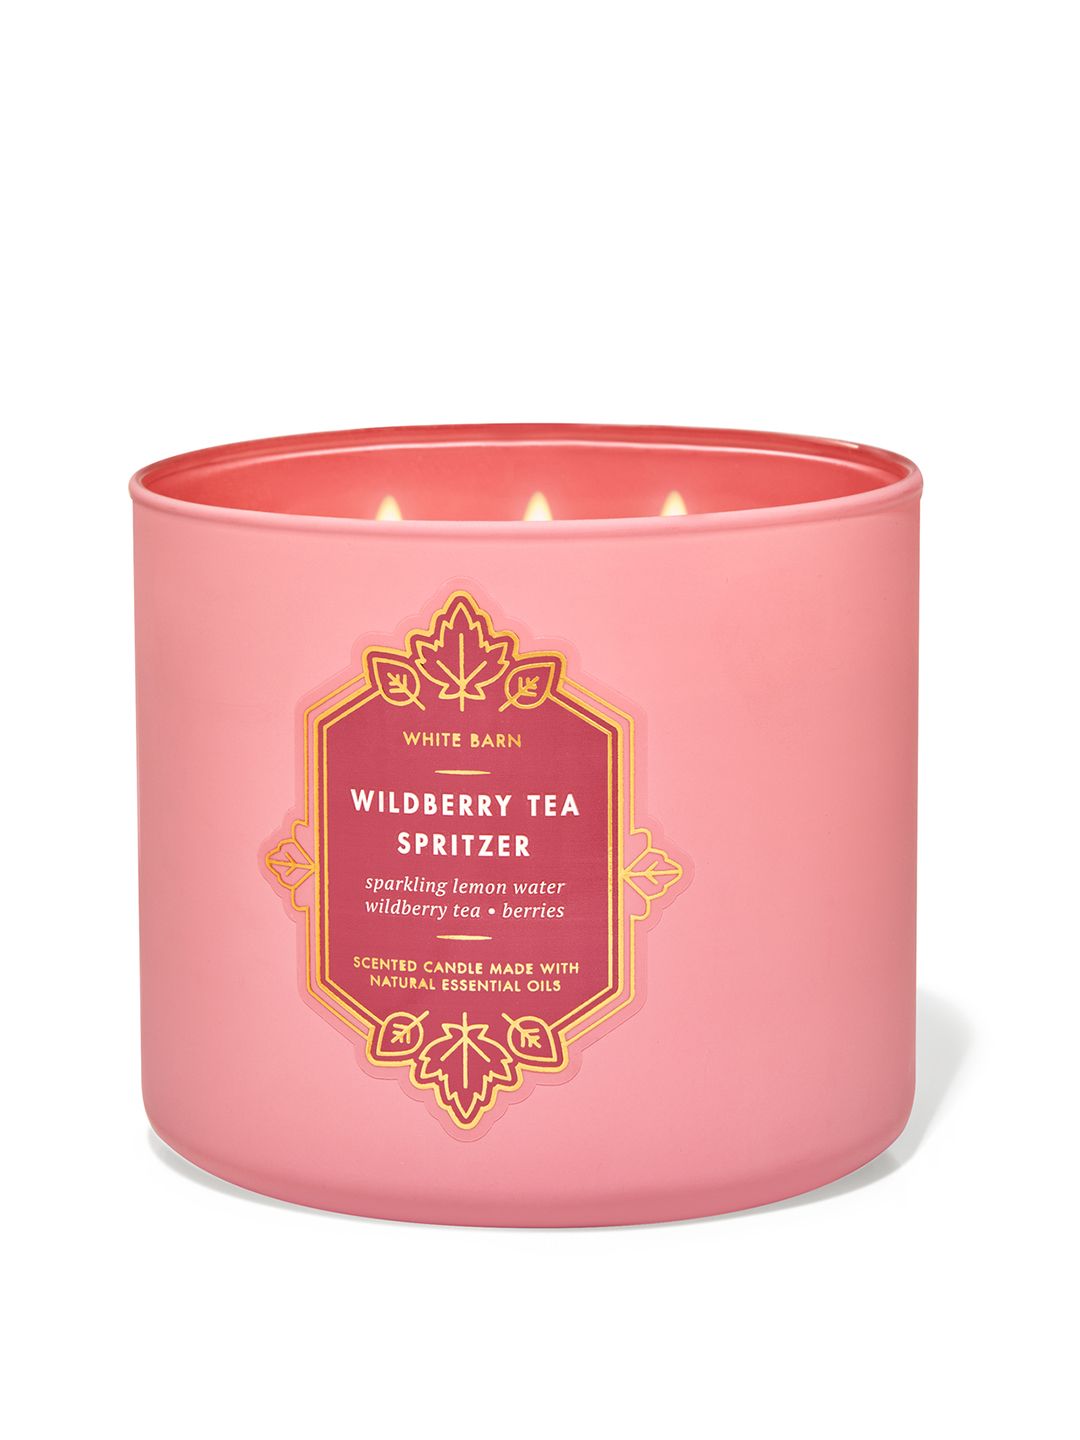 Bath & Body Works Wildberry Tea Spritzer 3-Wick Scented Candle with Essential Oils - 411g Price in India